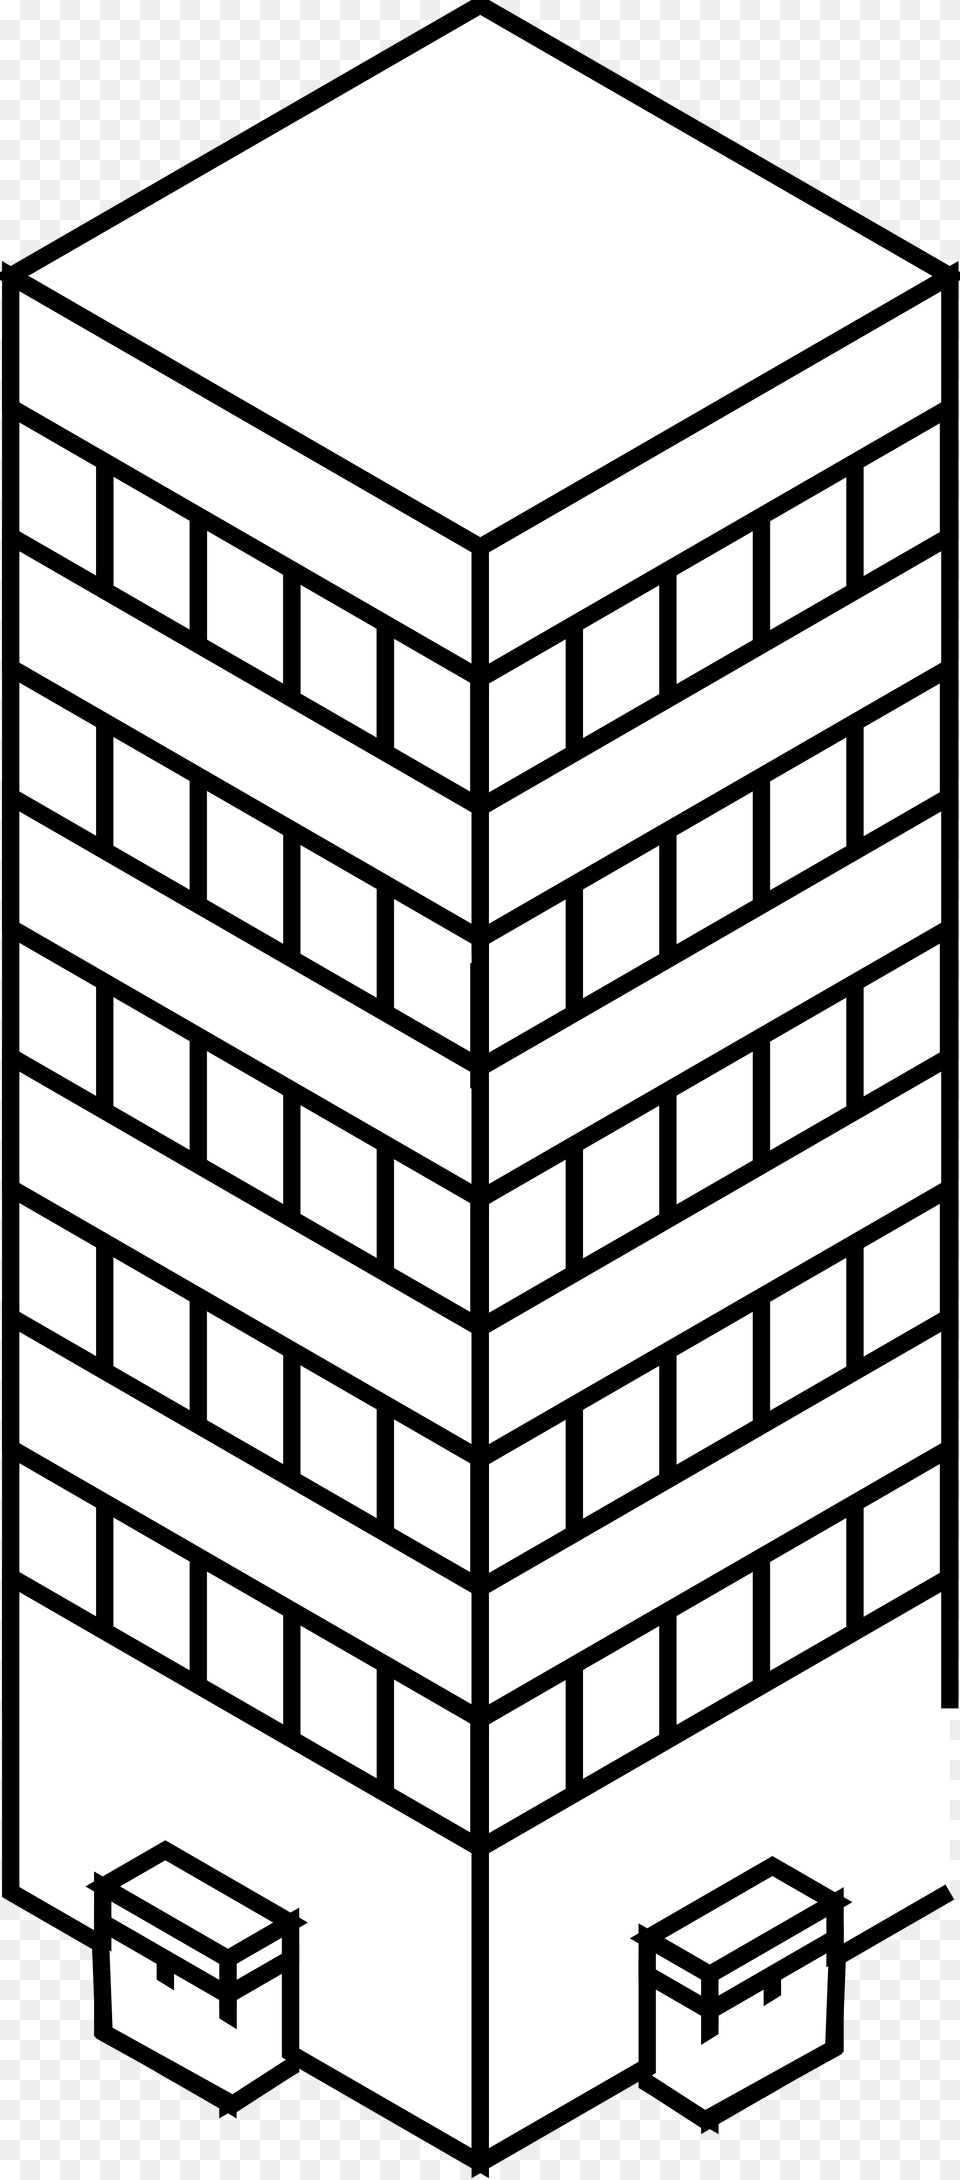 Skyscraper Clipart City Line Building Clip Art Black And White, Furniture, Infant Bed, Crib, Office Building Png